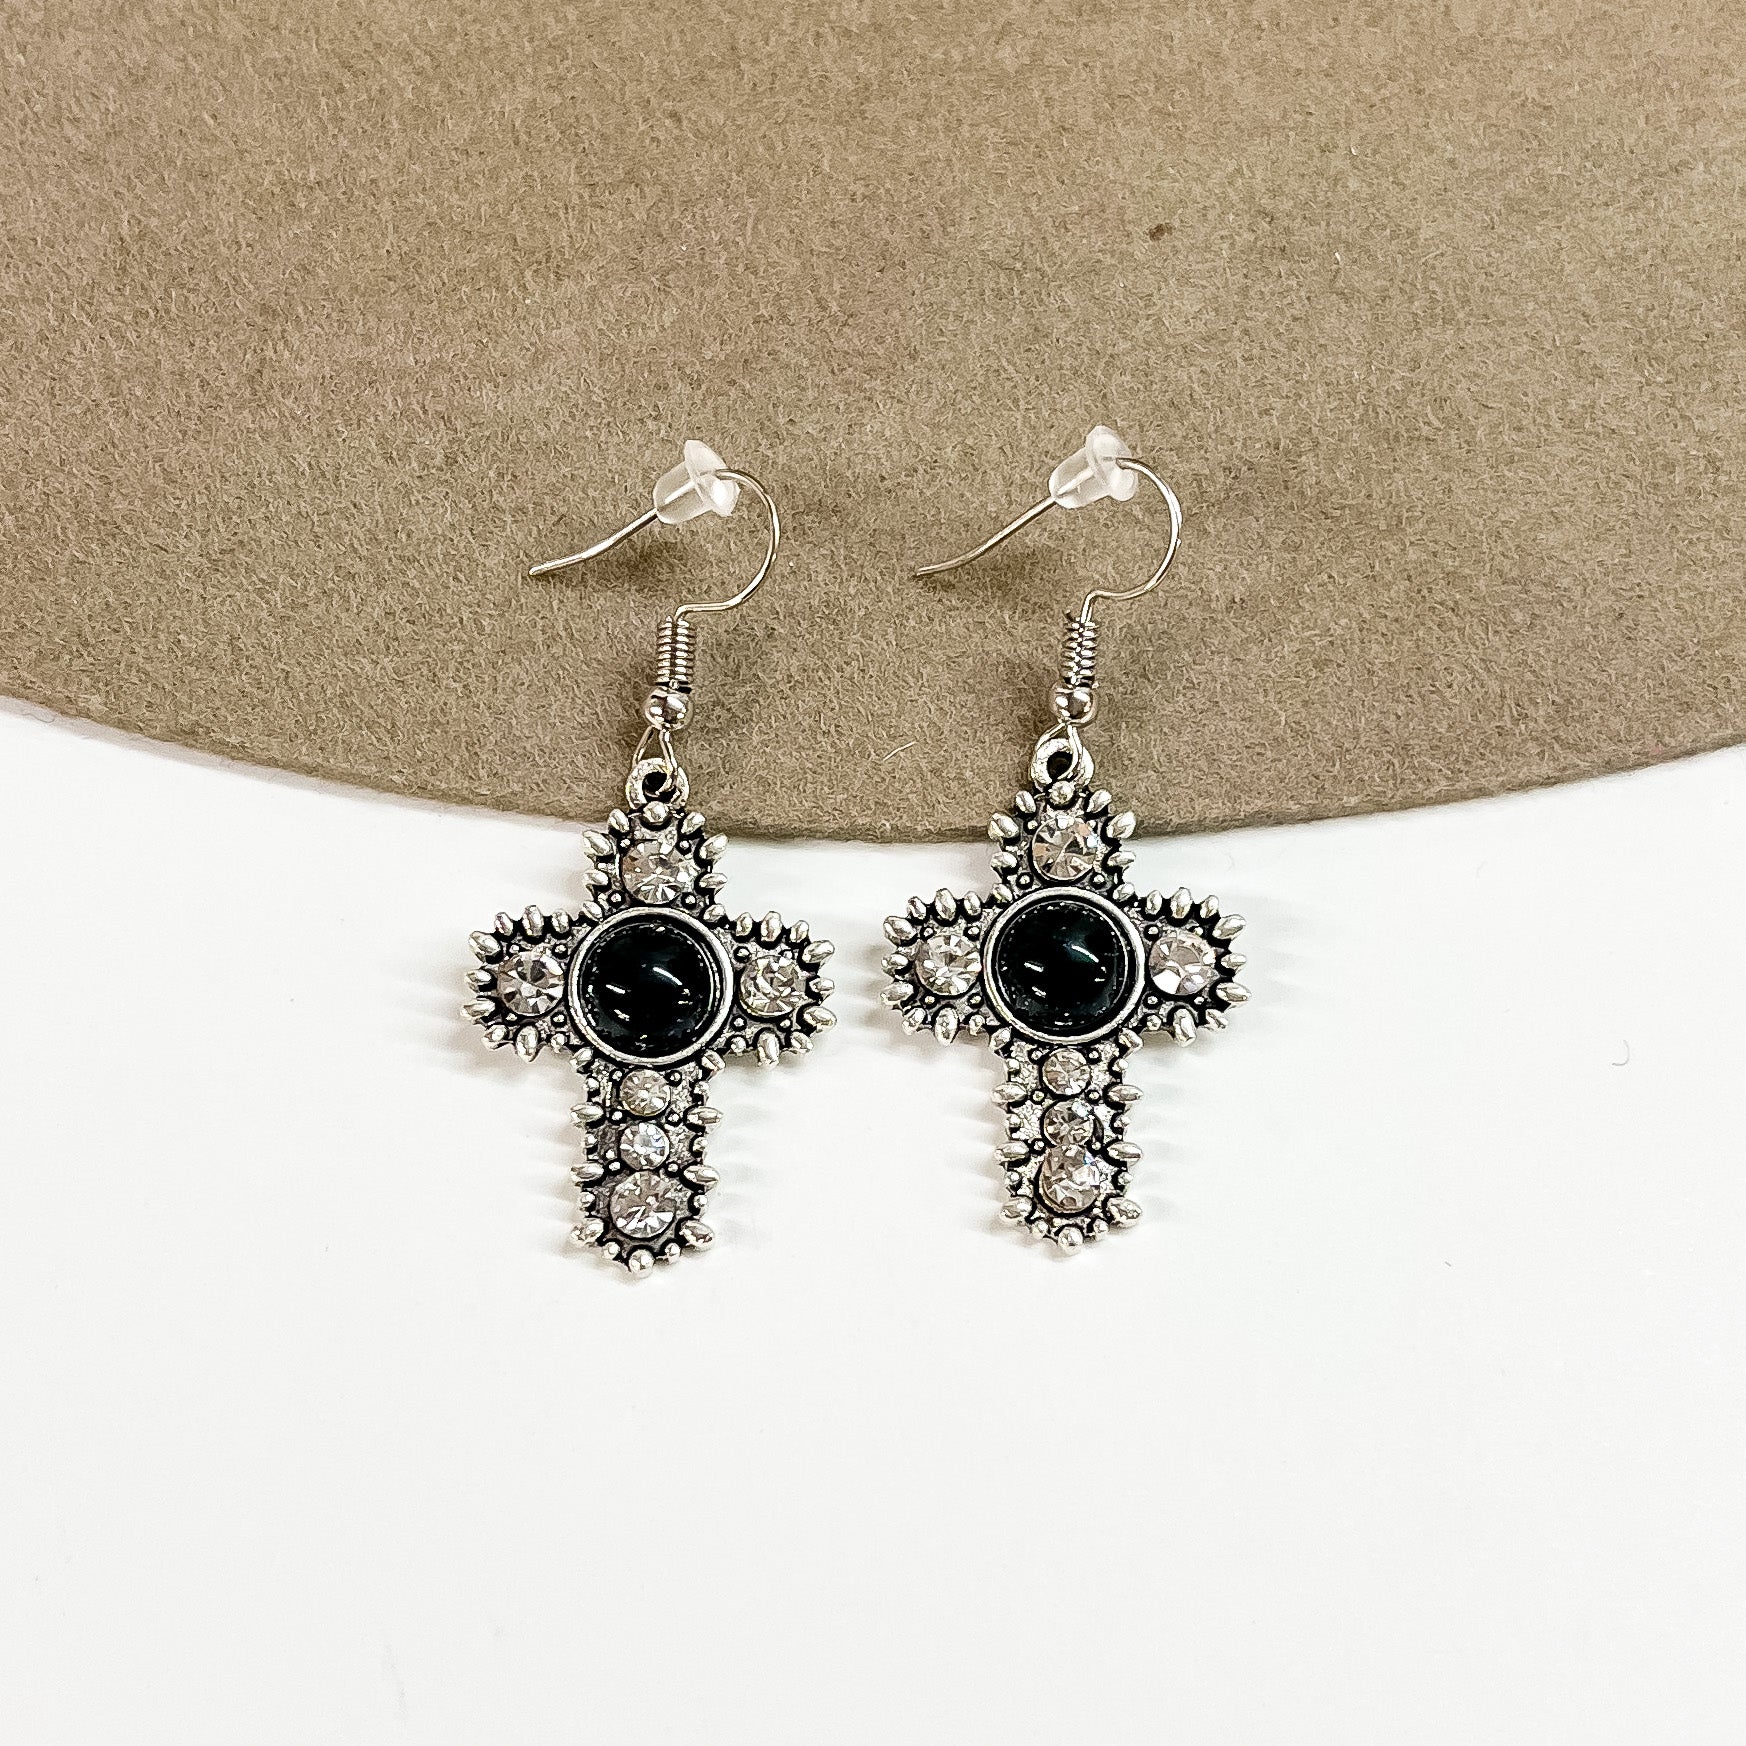 This is a pair of silver detailed cross earrings with small clear crystals  and a black circle stone in the center.  These earrings are laying on a brown felt hat brim and on a white background.